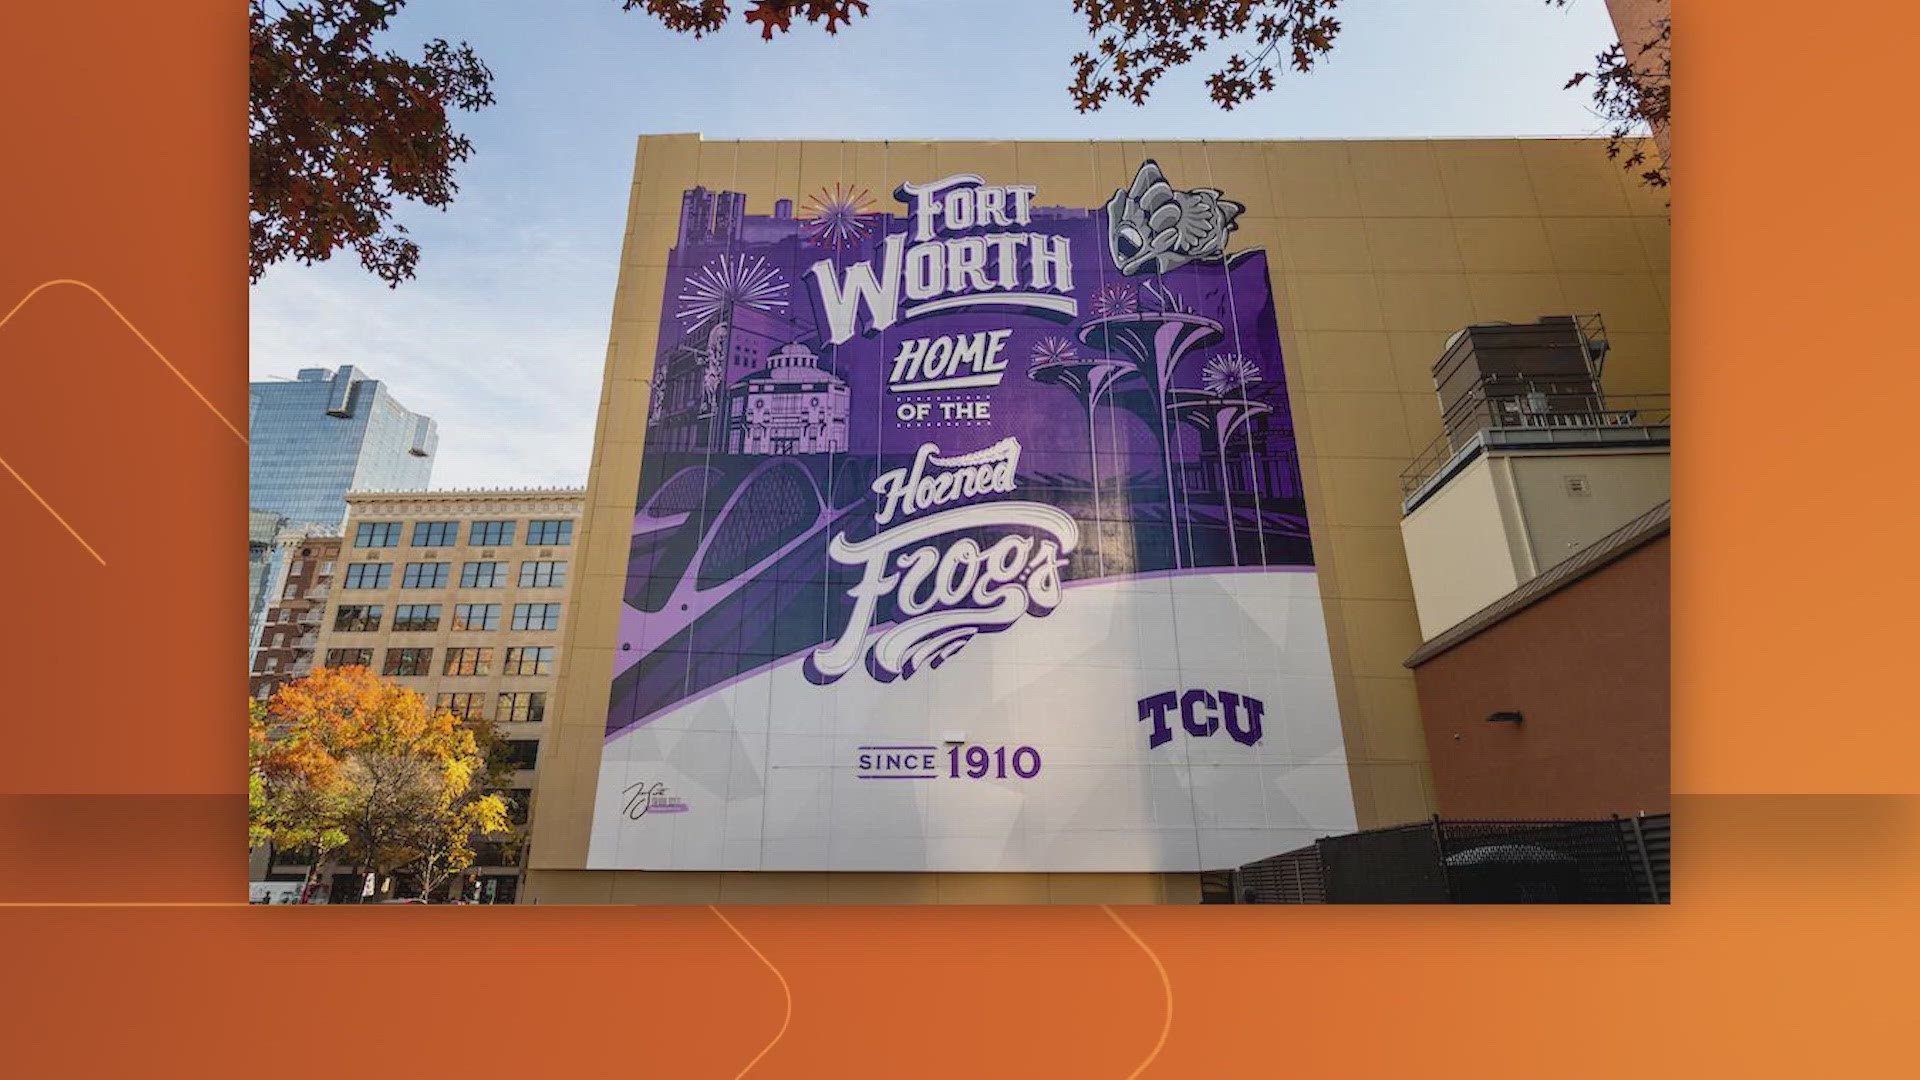 The muralist is a TCU grad who wanted to remind folks that the university belongs to Fort Worth.